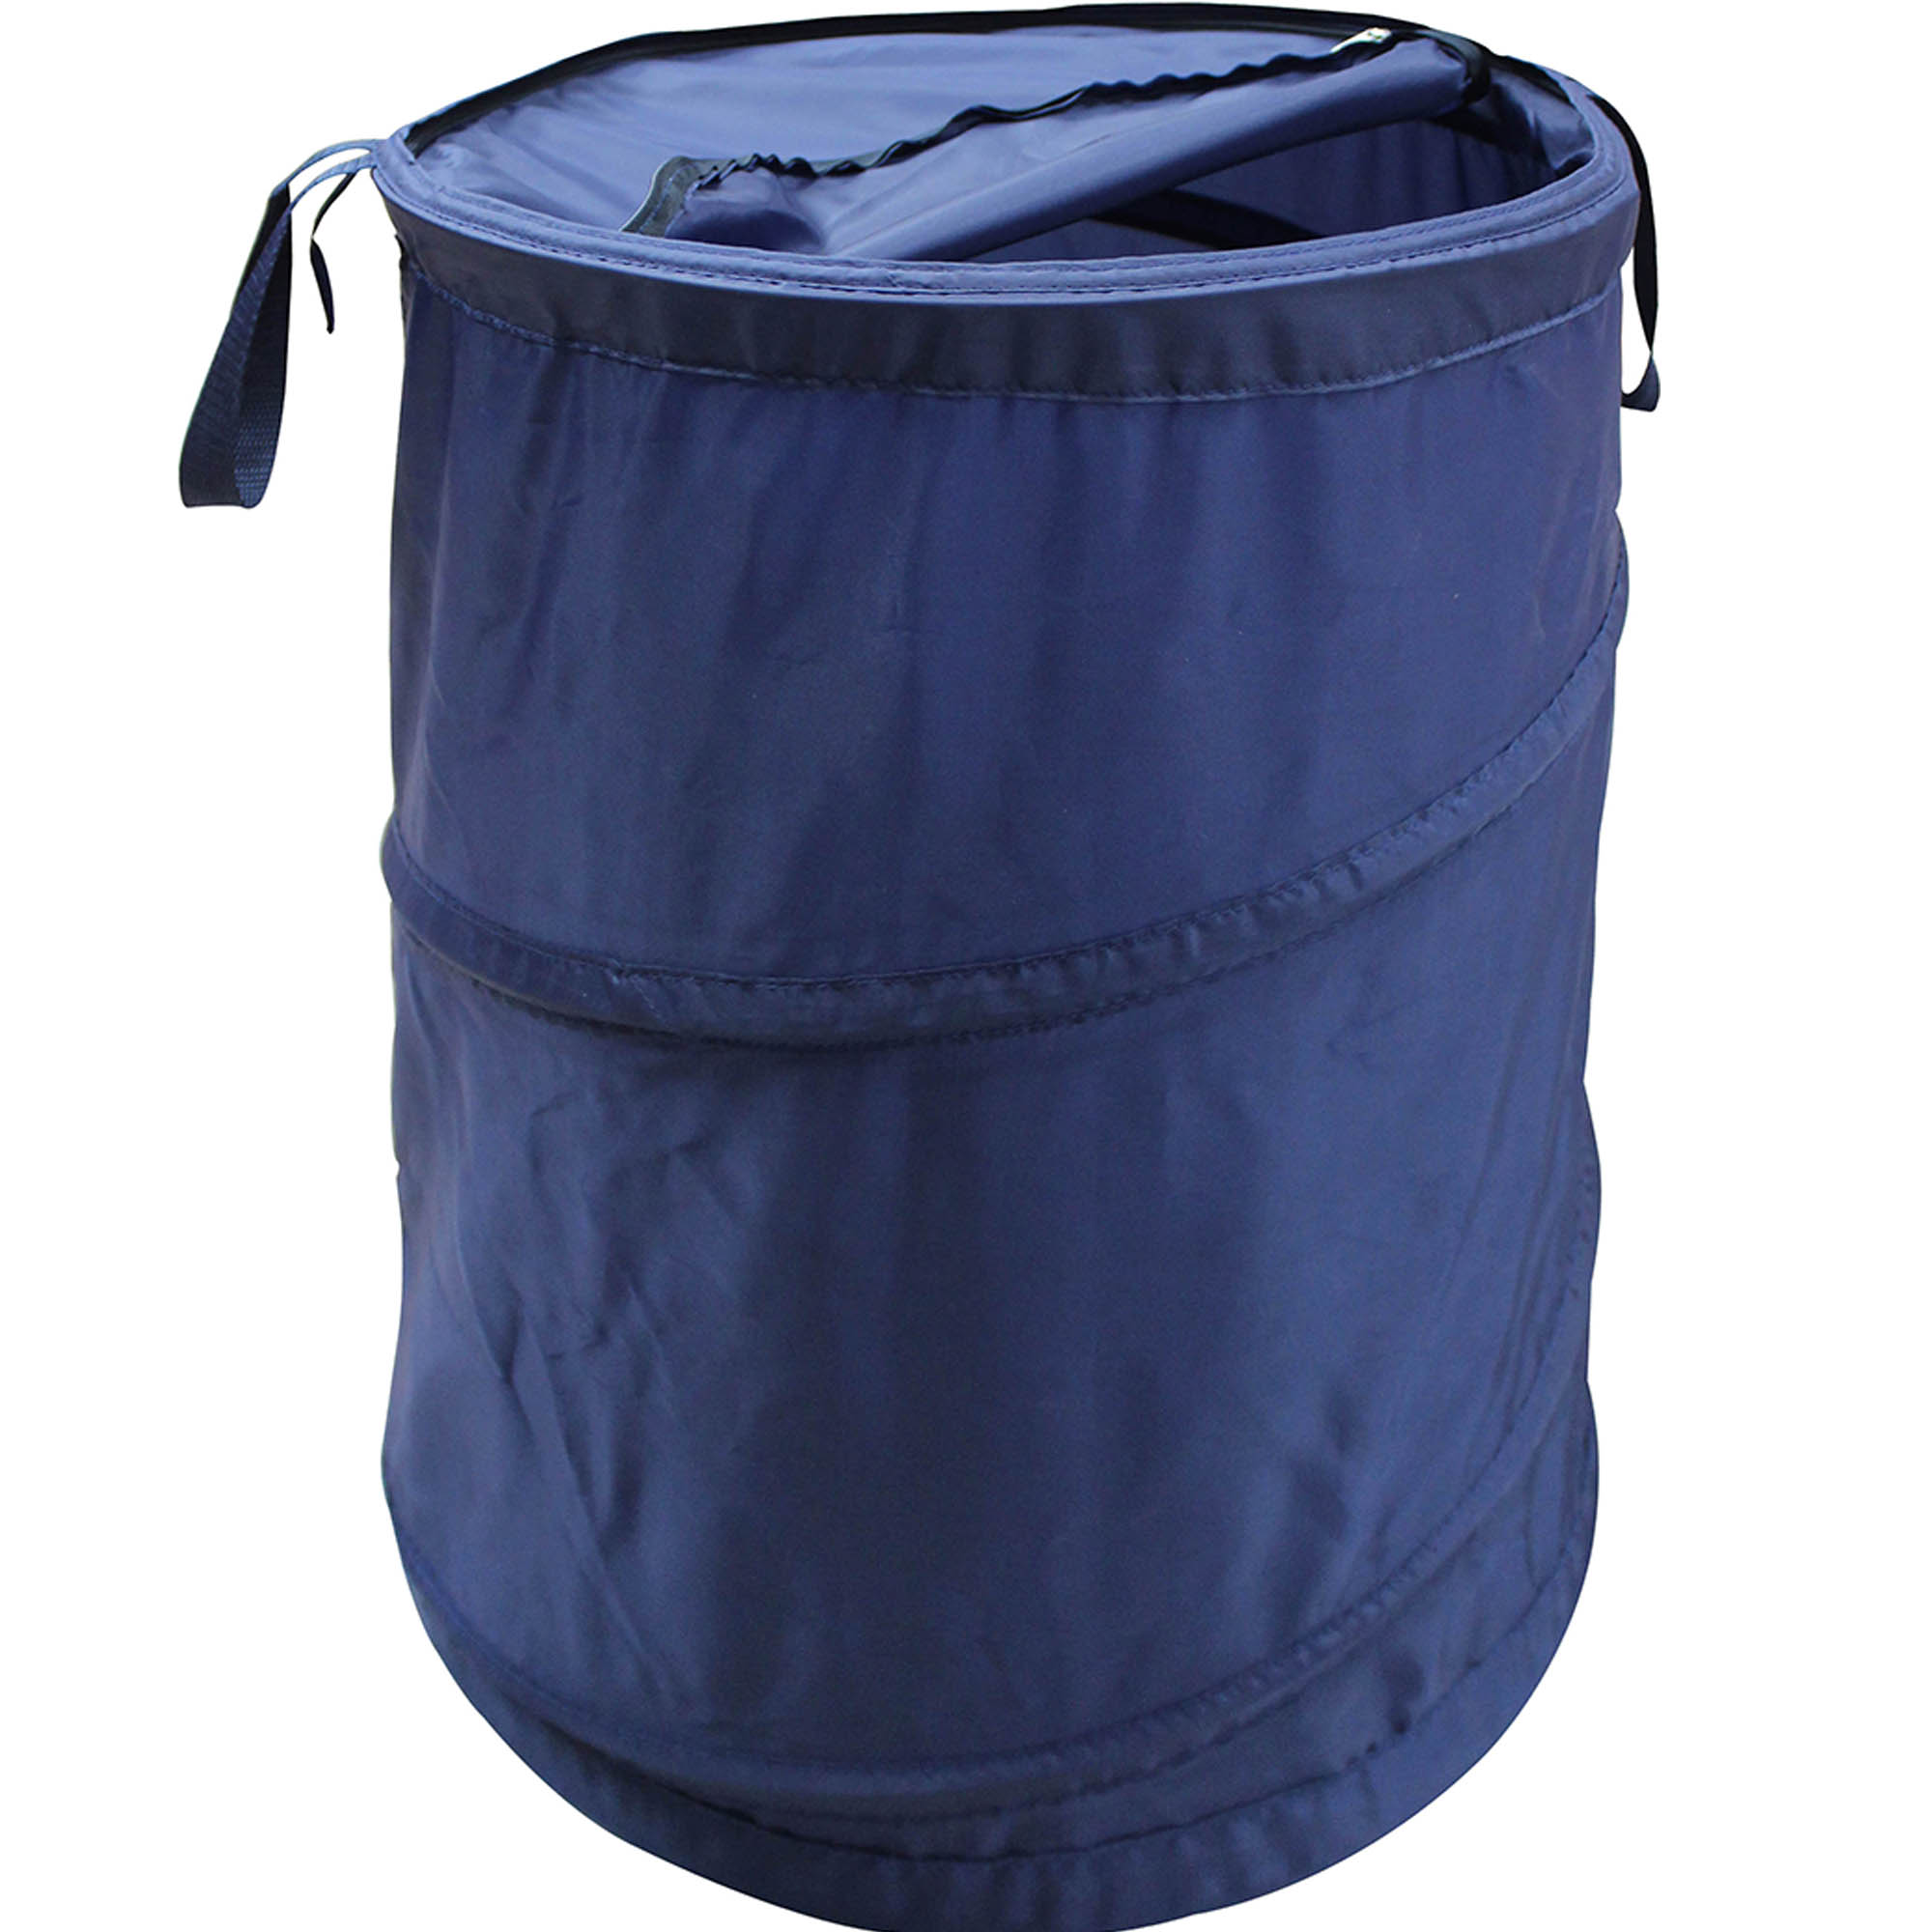 Mainstays Spiral Pop-up Polyester Laundry Hamper with Lid, Blue, 2 Pack - image 1 of 4